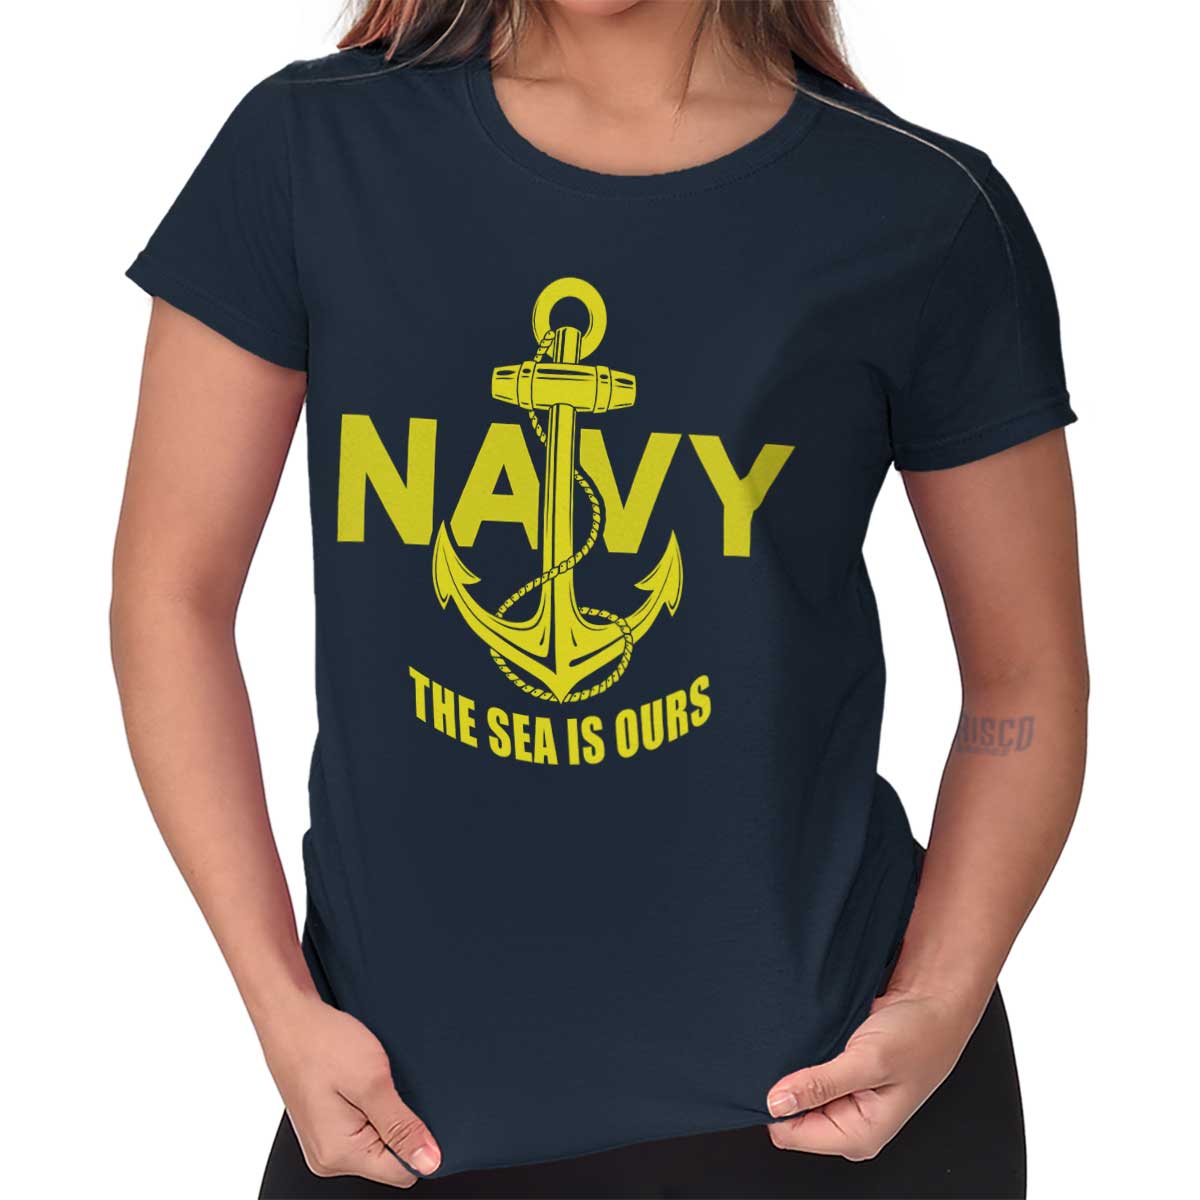 Navy Sea Is Ours Patriotic Military Anchor Graphic T Shirts for Women T ...